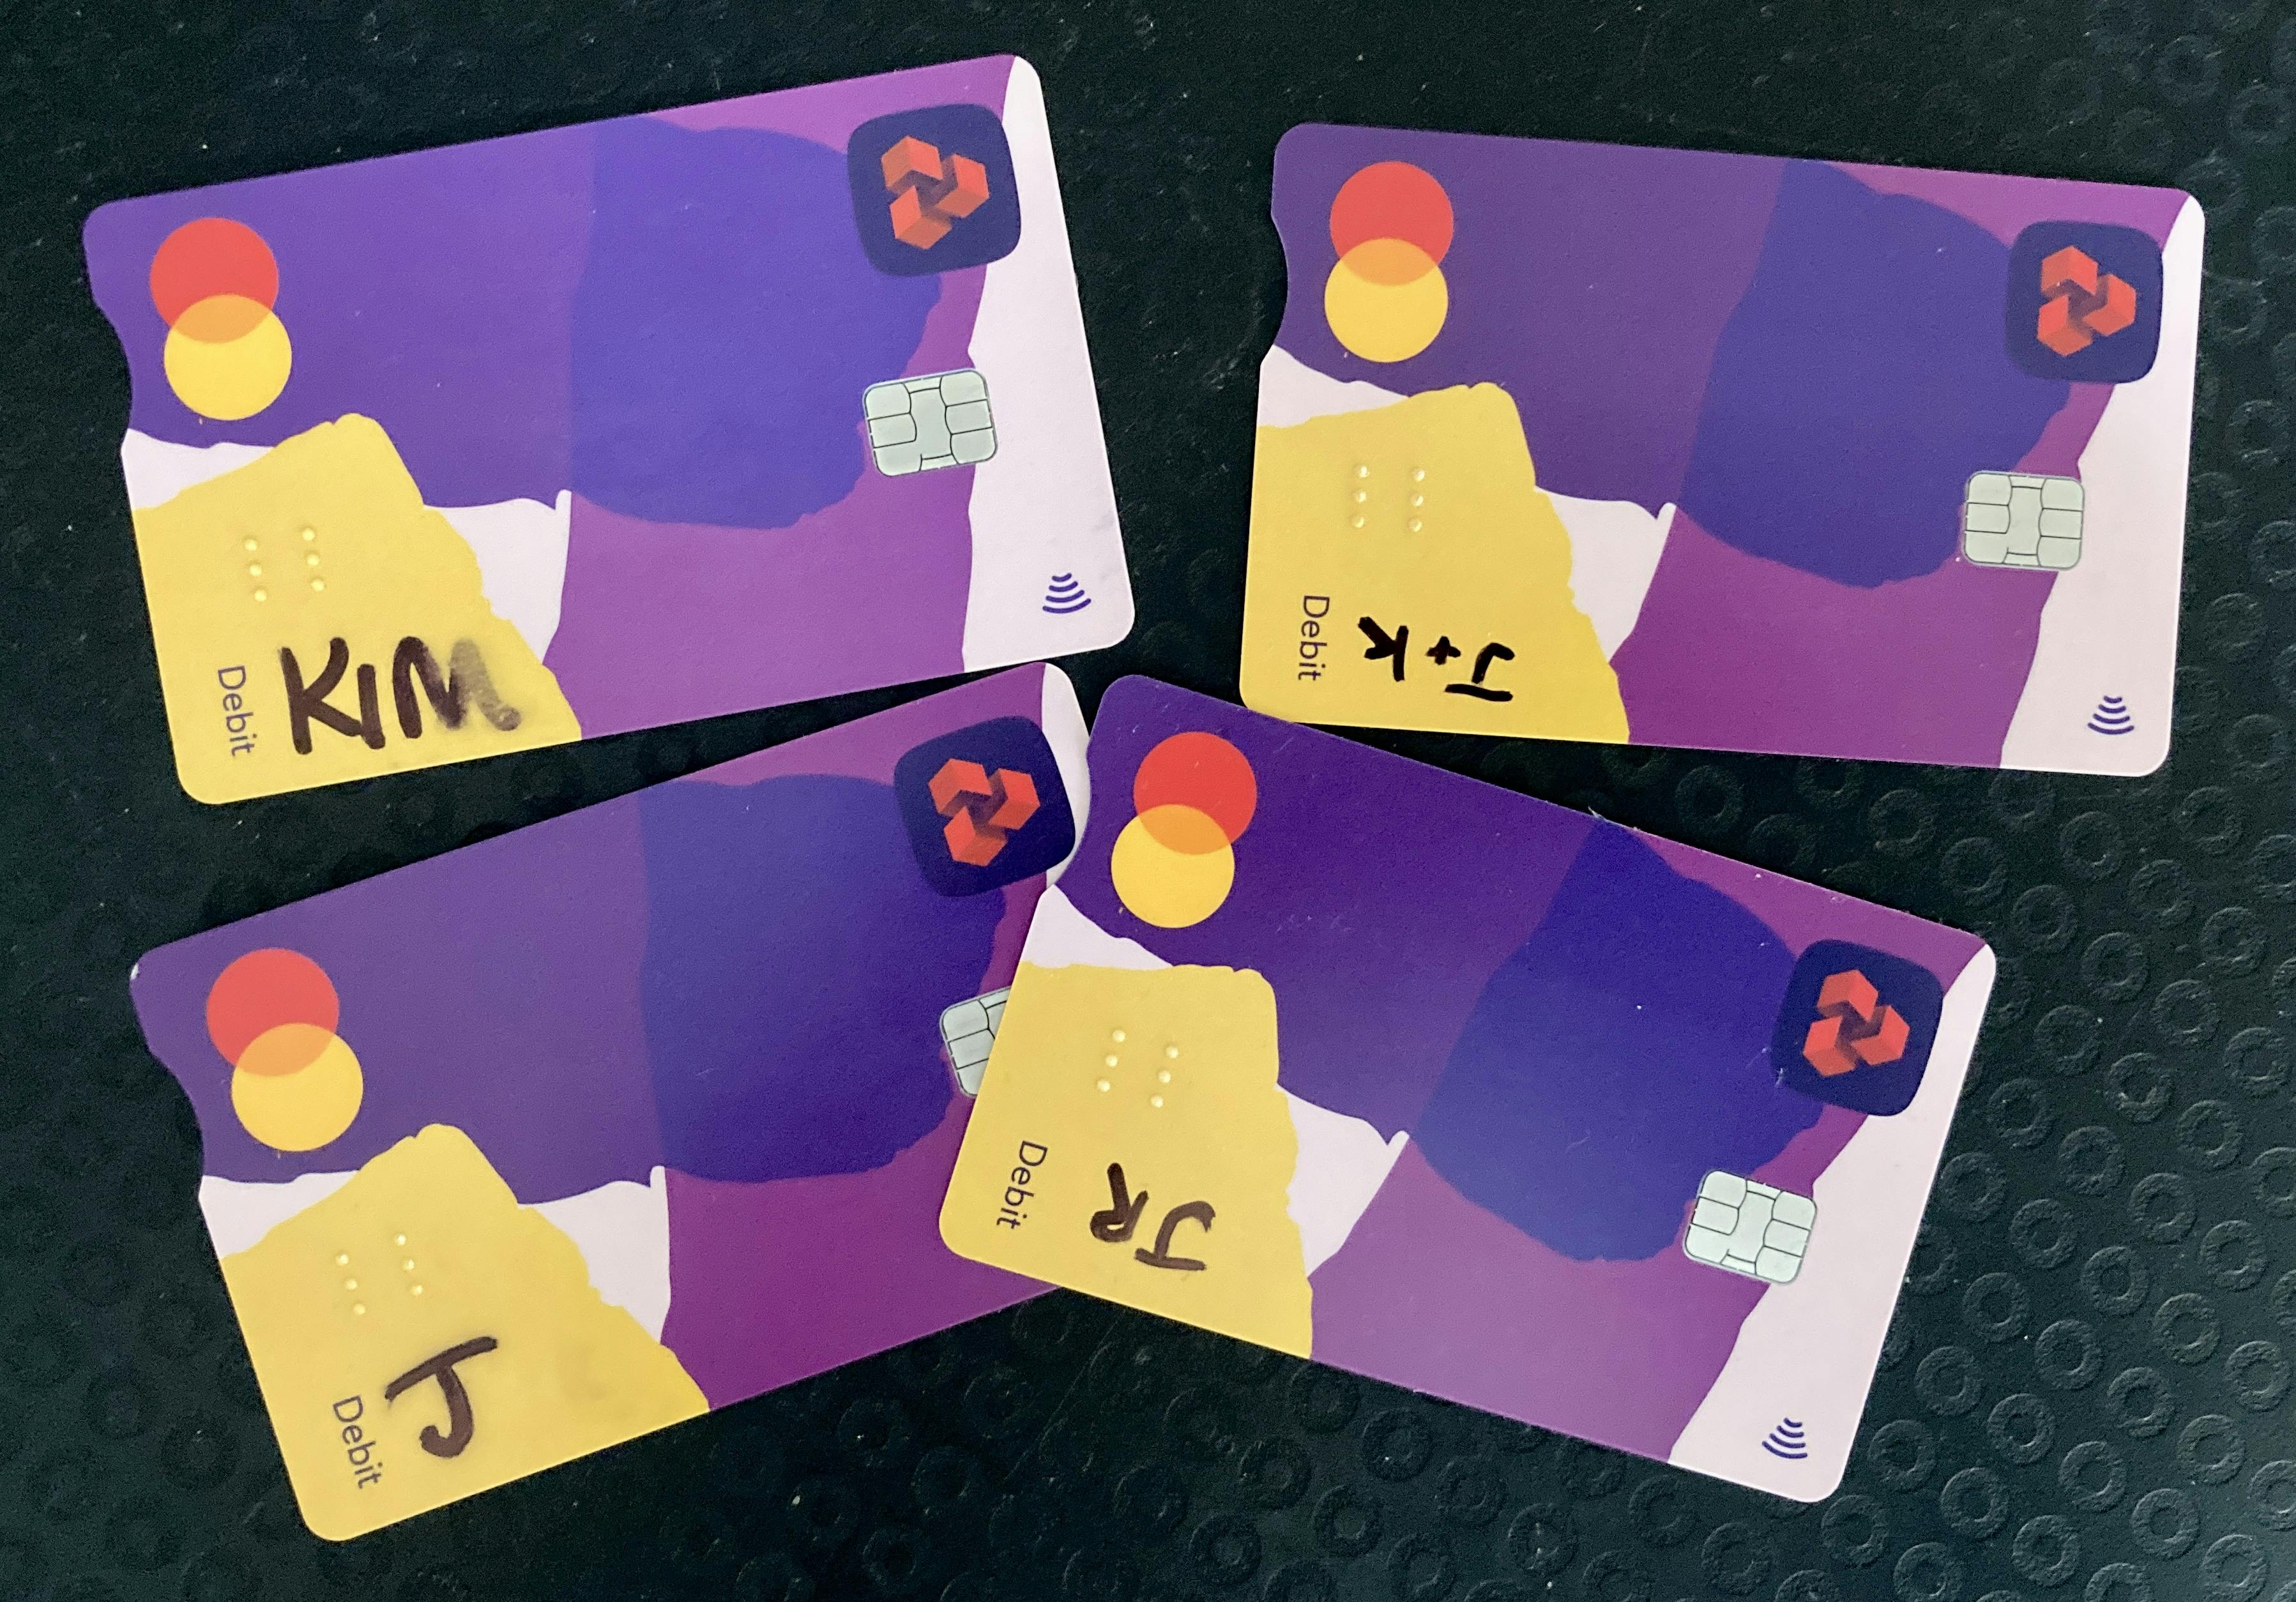 Four identical Natwest bank cards against a black background. Each card has initials in the bottom left corner, written in sharpie pen.